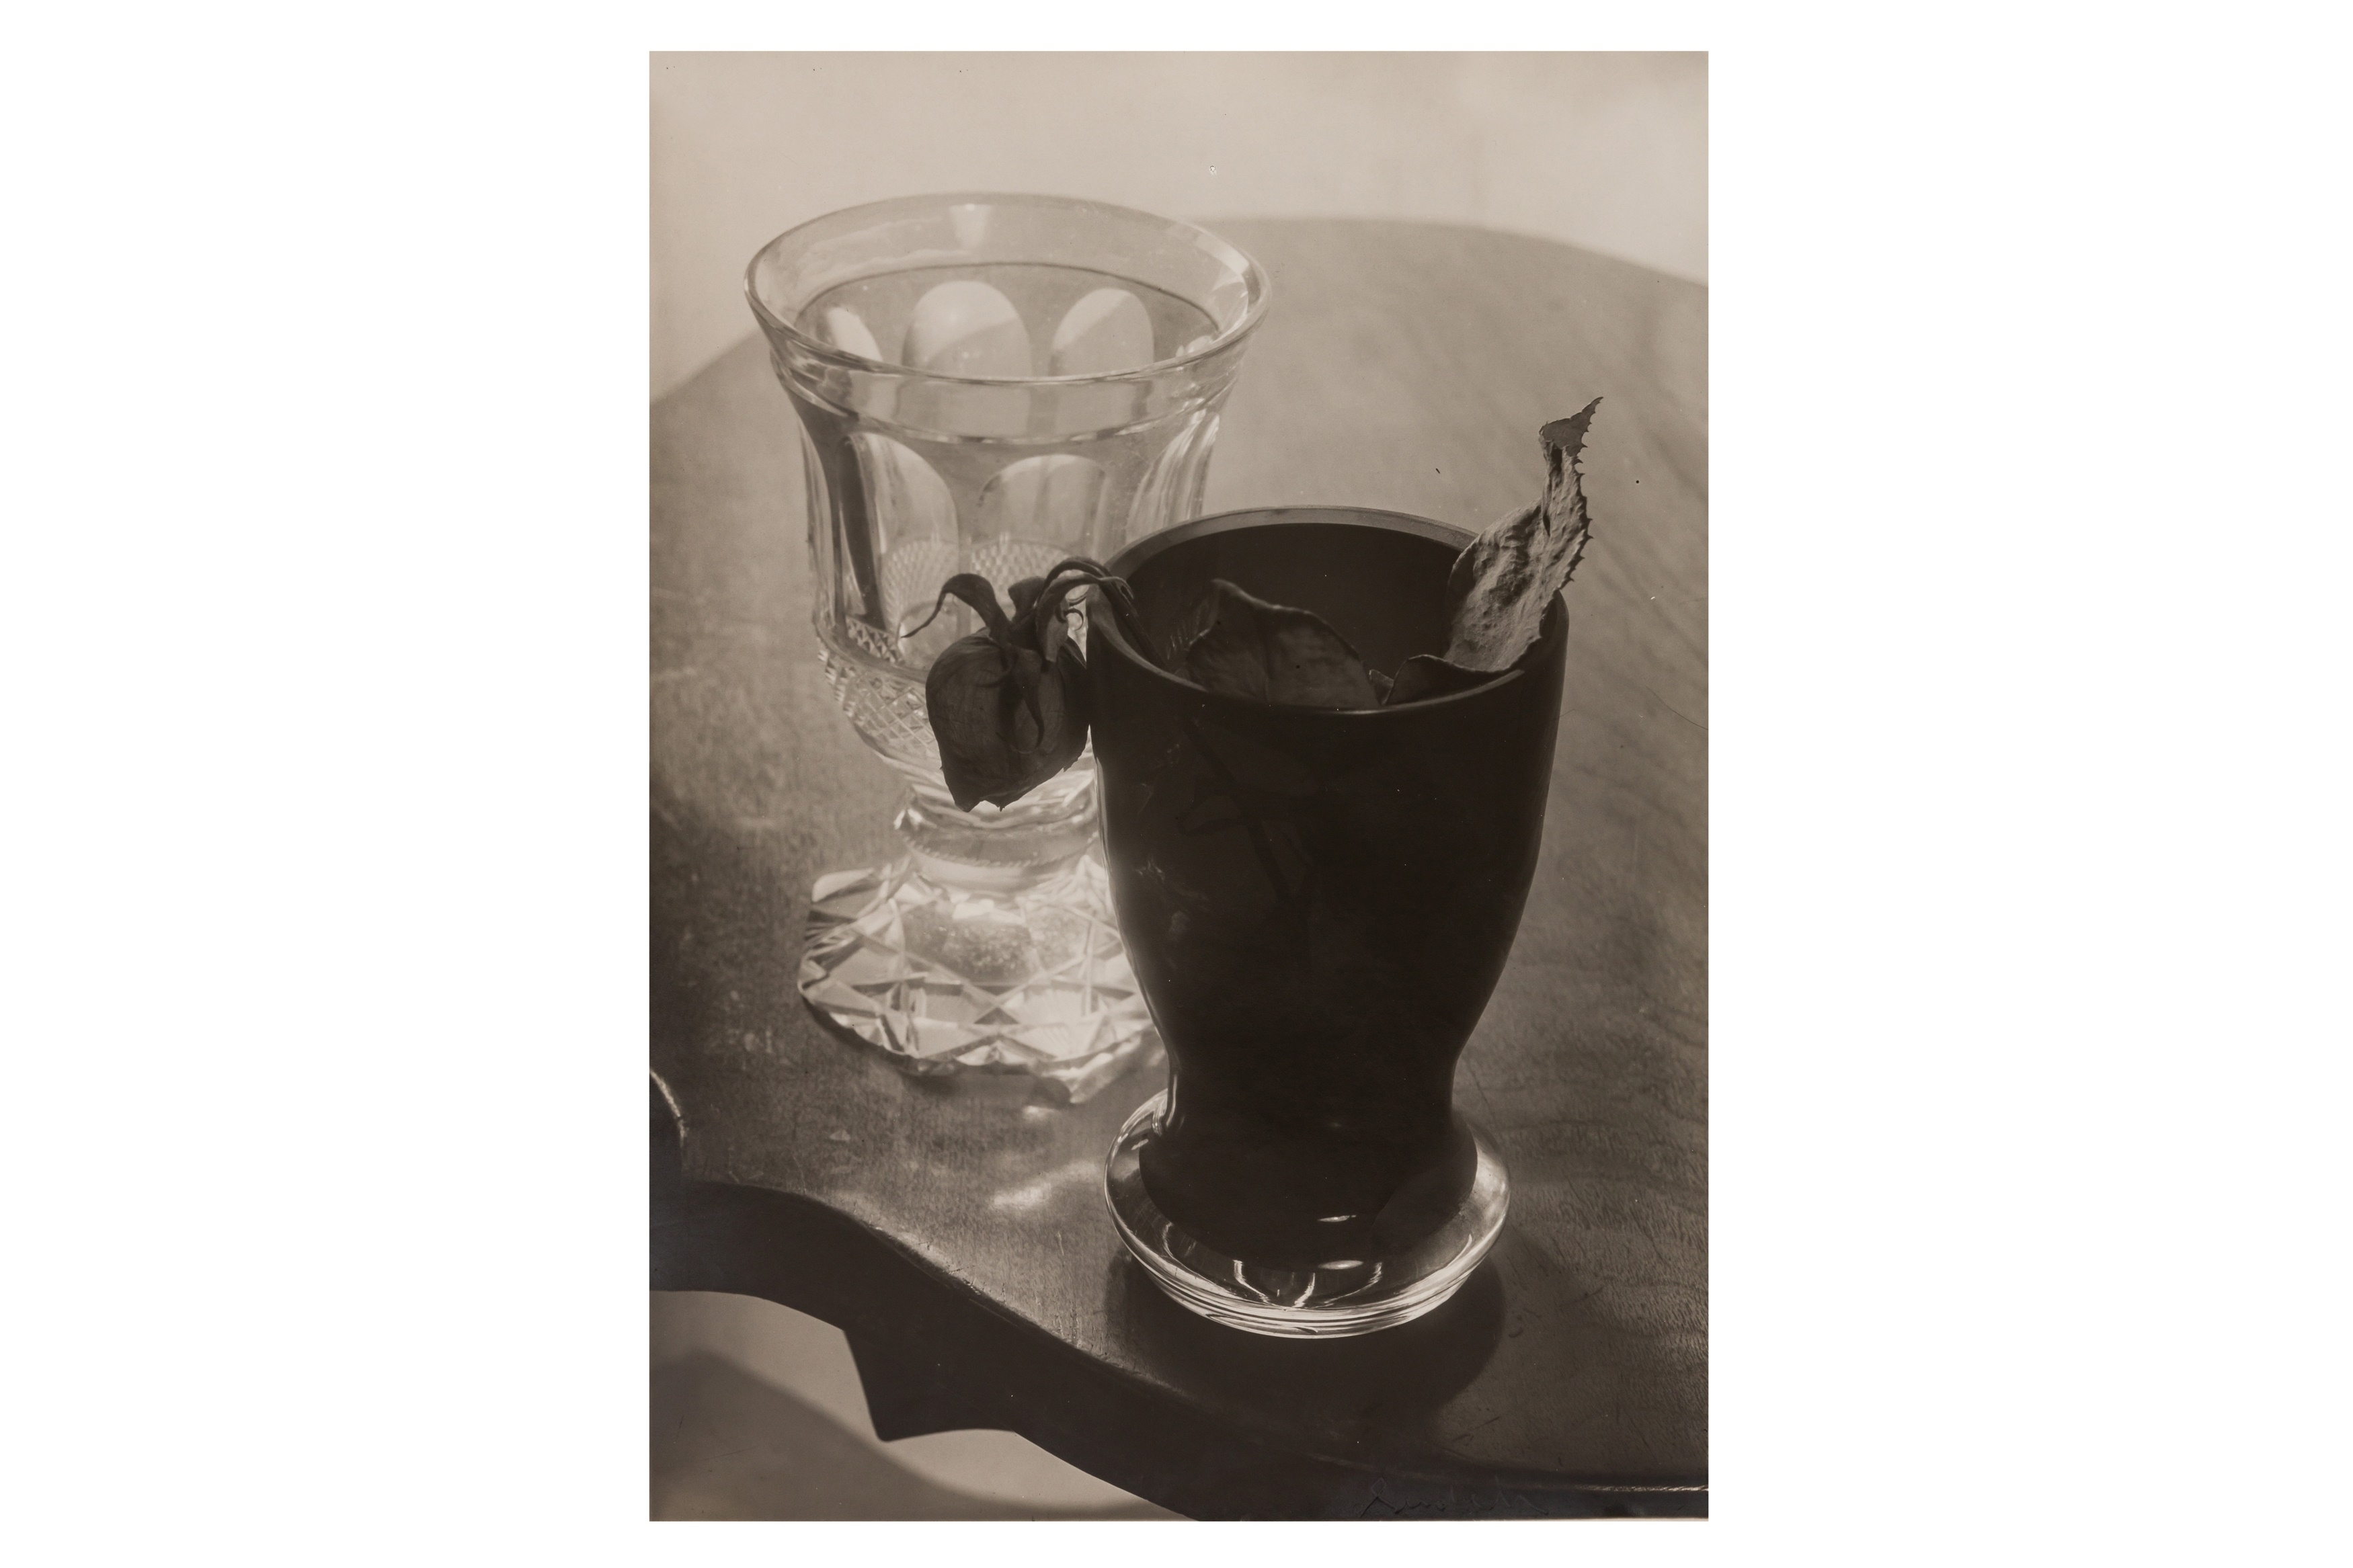 Artwork by Josef Sudek, STILL LIFE WITH GLASSES, Made of Silver gelatin print